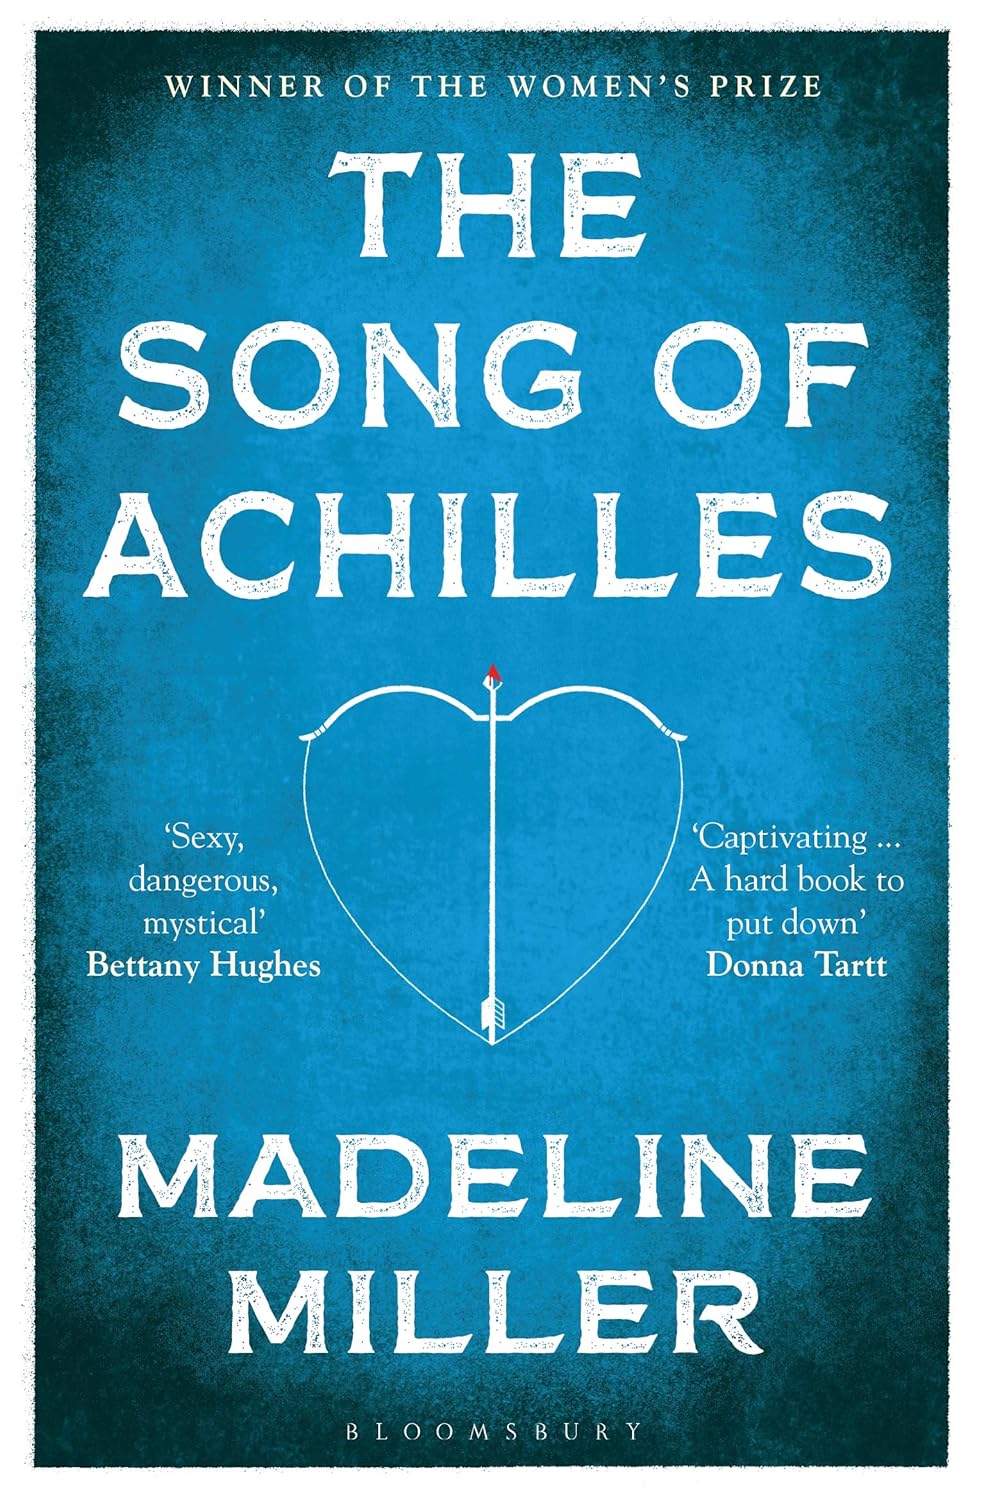 The blue book cover for The Song of Achilles. At the centre is a white bow and arrow and the shape resembles a heart.